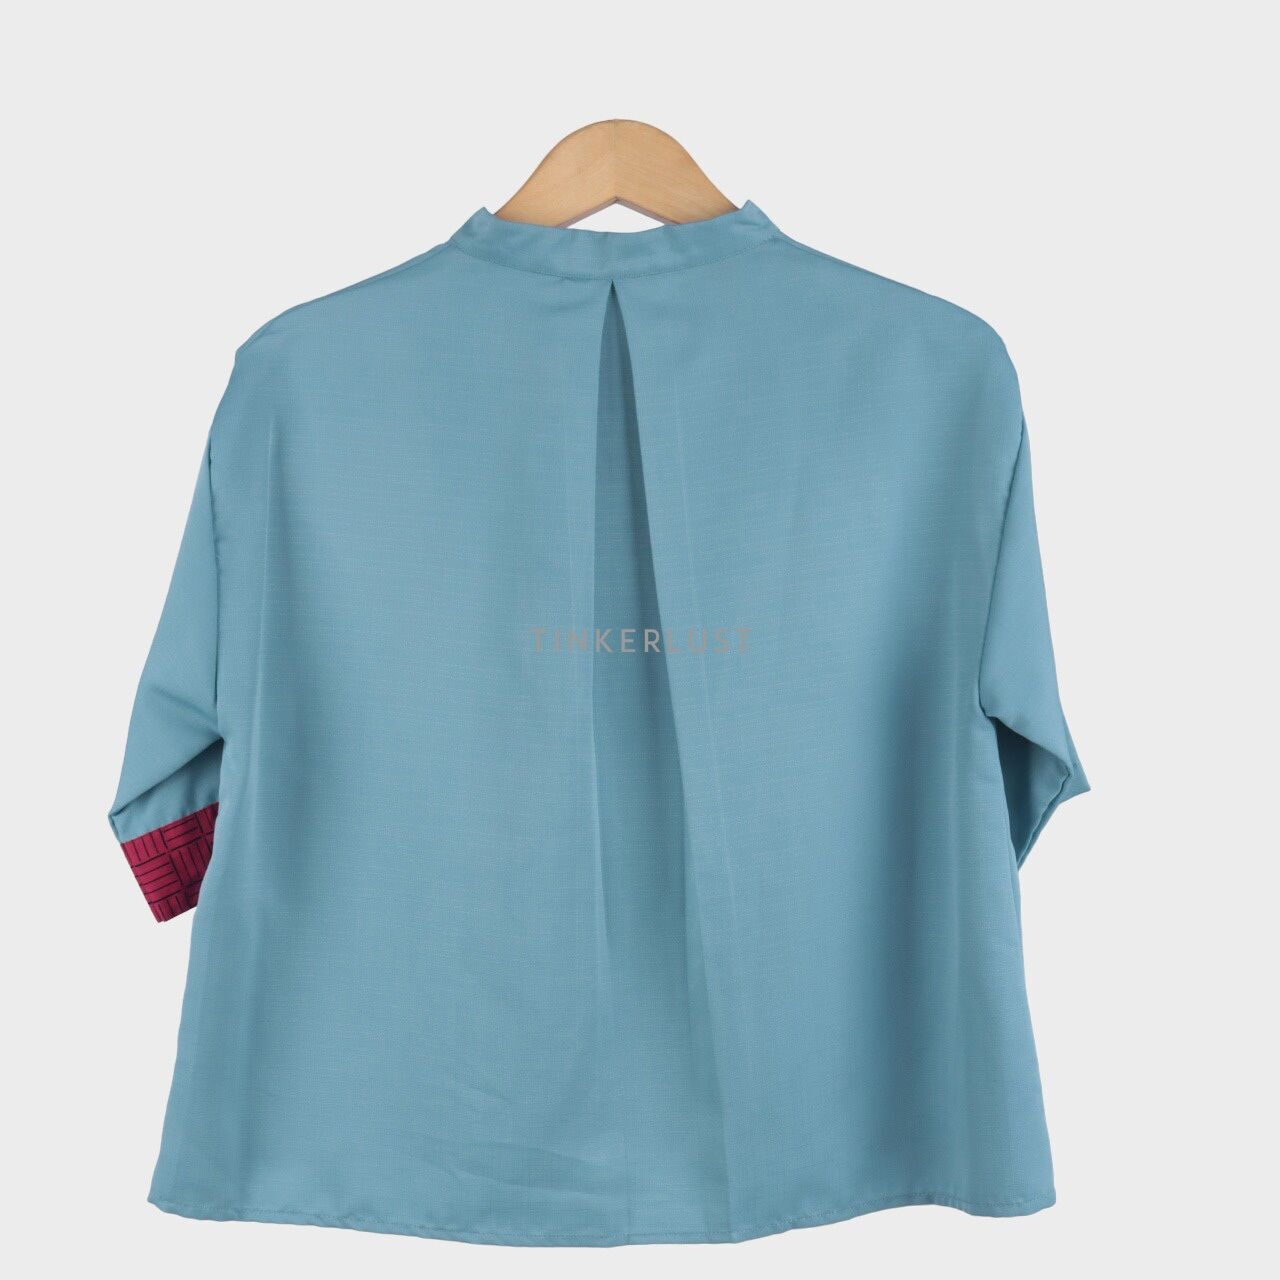 Shawl & co Red & Tosca Blouse